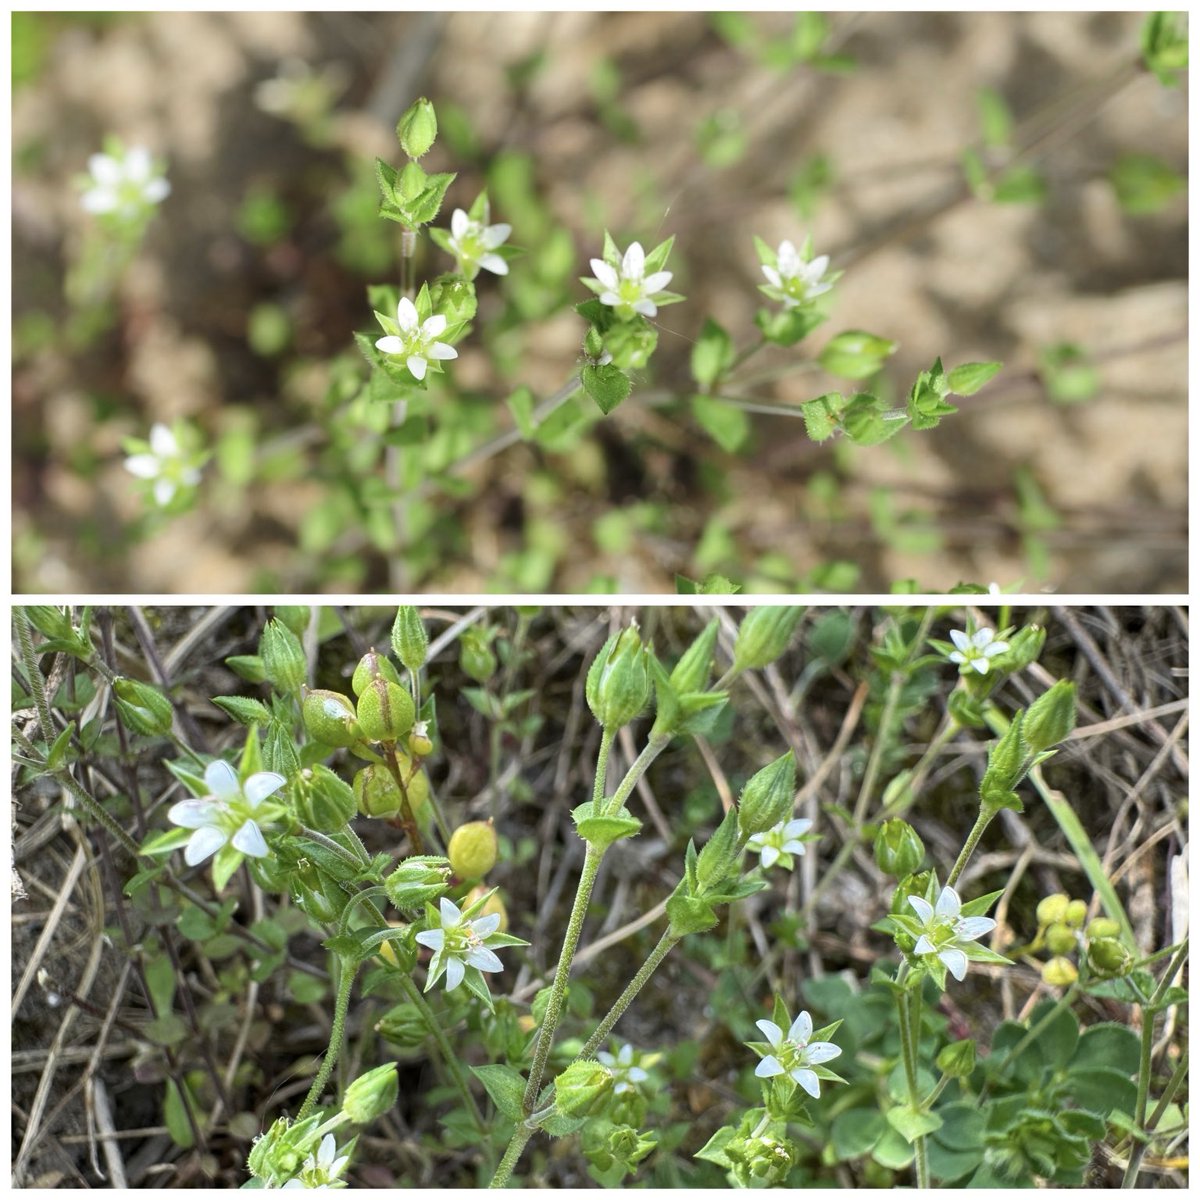 You really have to get close to the ground to see the tiny flowers of Thyme-leaved Sandwort (Arenaria serpyllifolia) #pinkfamily #lancashire #wildflowerhour ⁦@BSBIbotany⁩